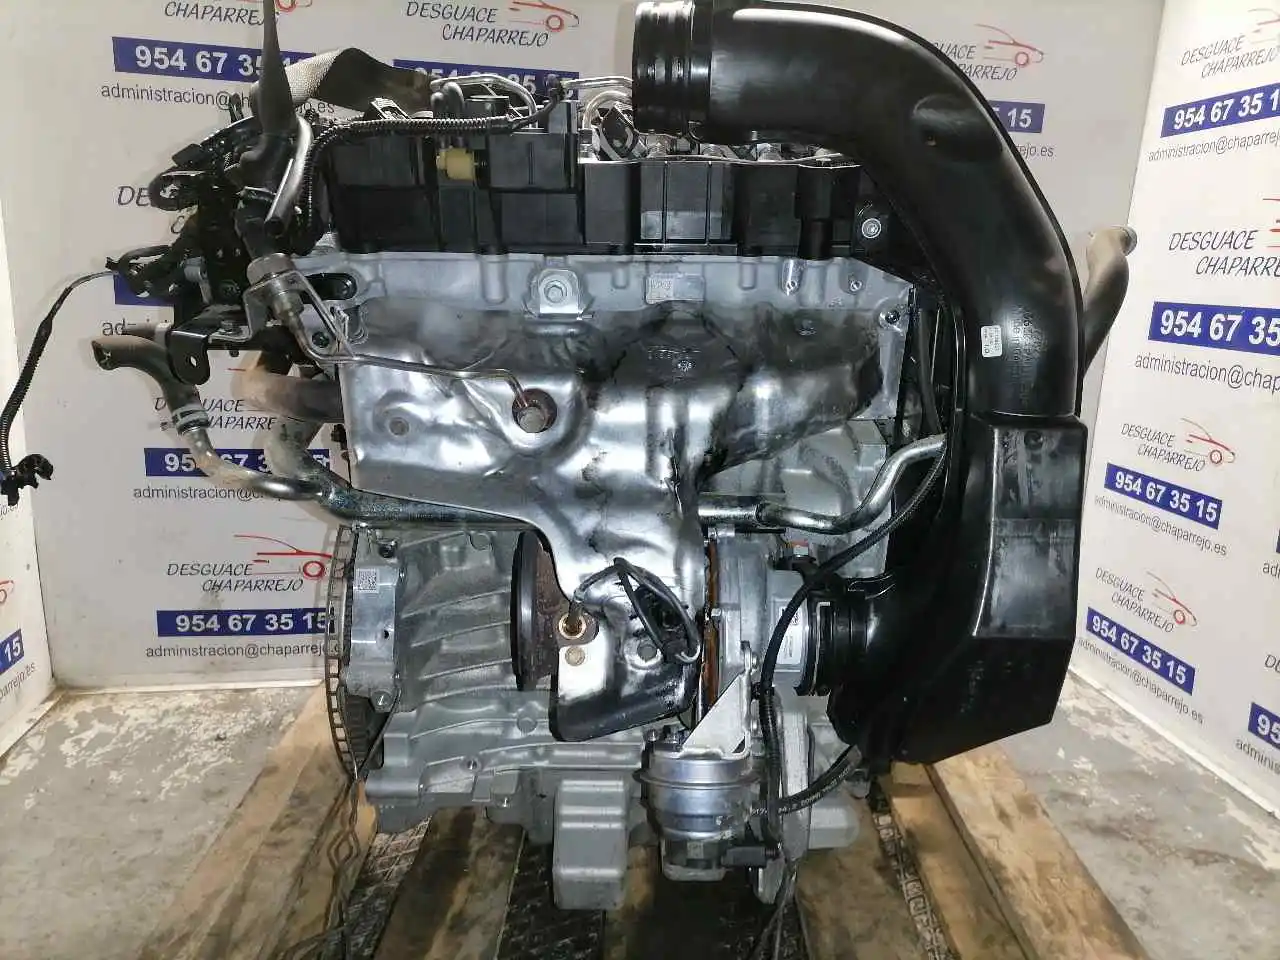 Complete engine volvo xc 40 basis 2wd d4204t16 d4204t16 651055